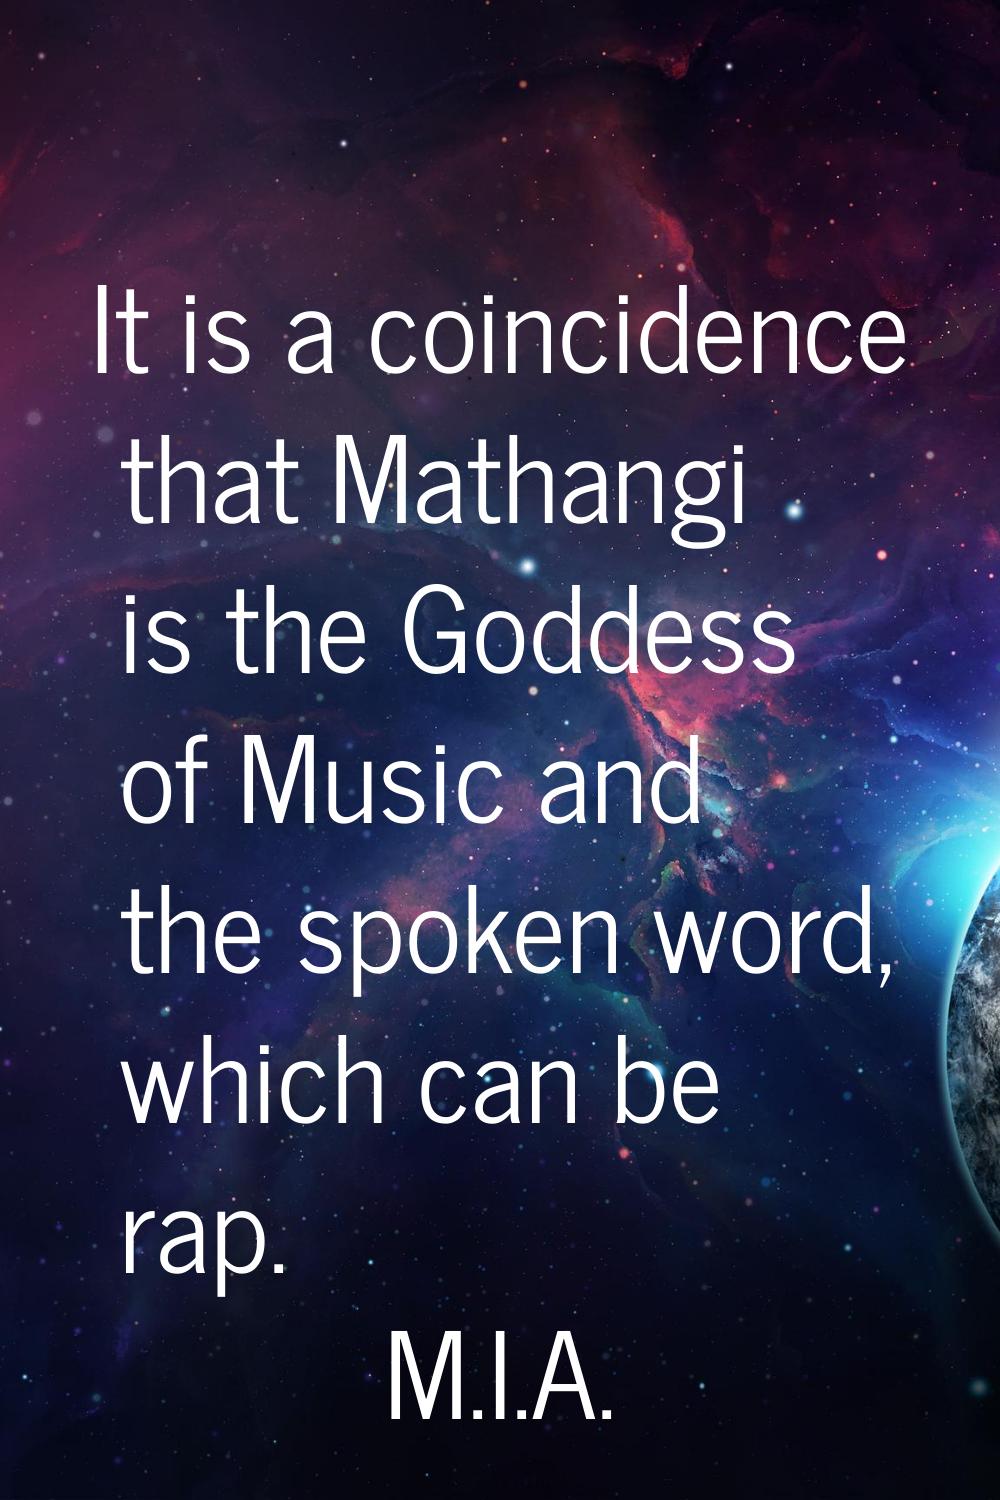 It is a coincidence that Mathangi is the Goddess of Music and the spoken word, which can be rap.